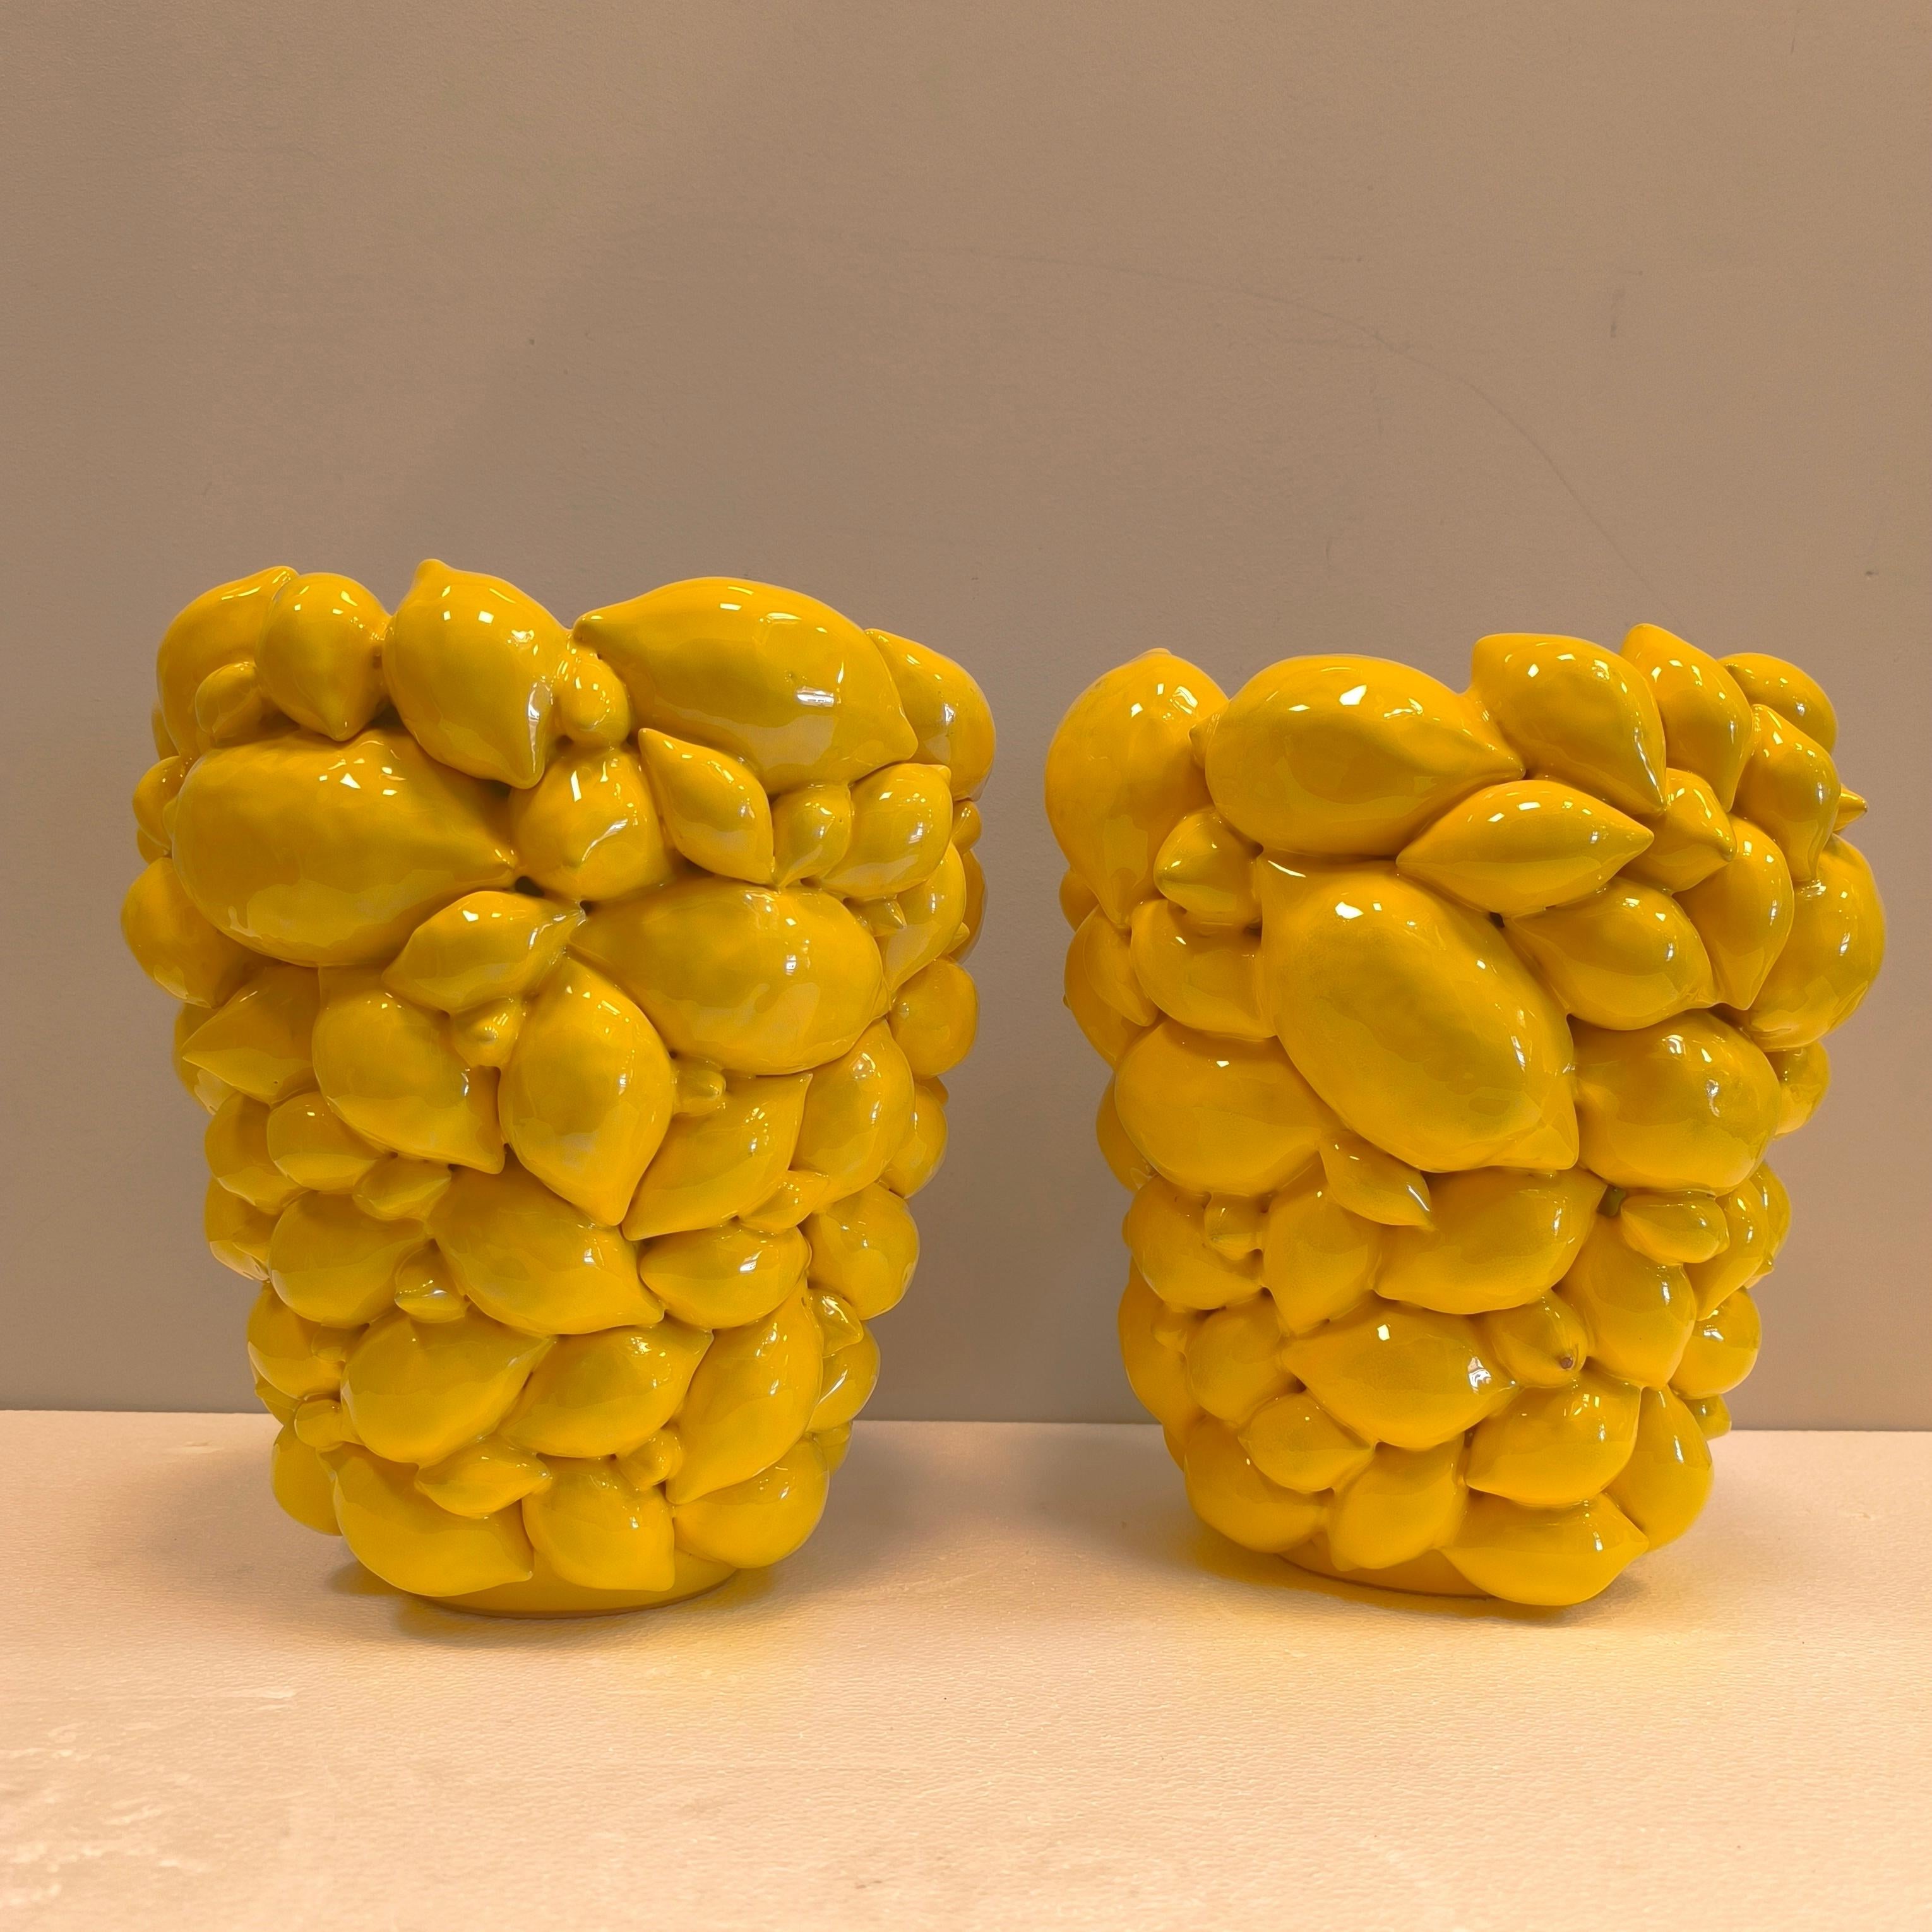 Contemporary Pair of Italy  lemon vases, Yellow glazed ceramic, R. Acampora, Limited Edition For Sale